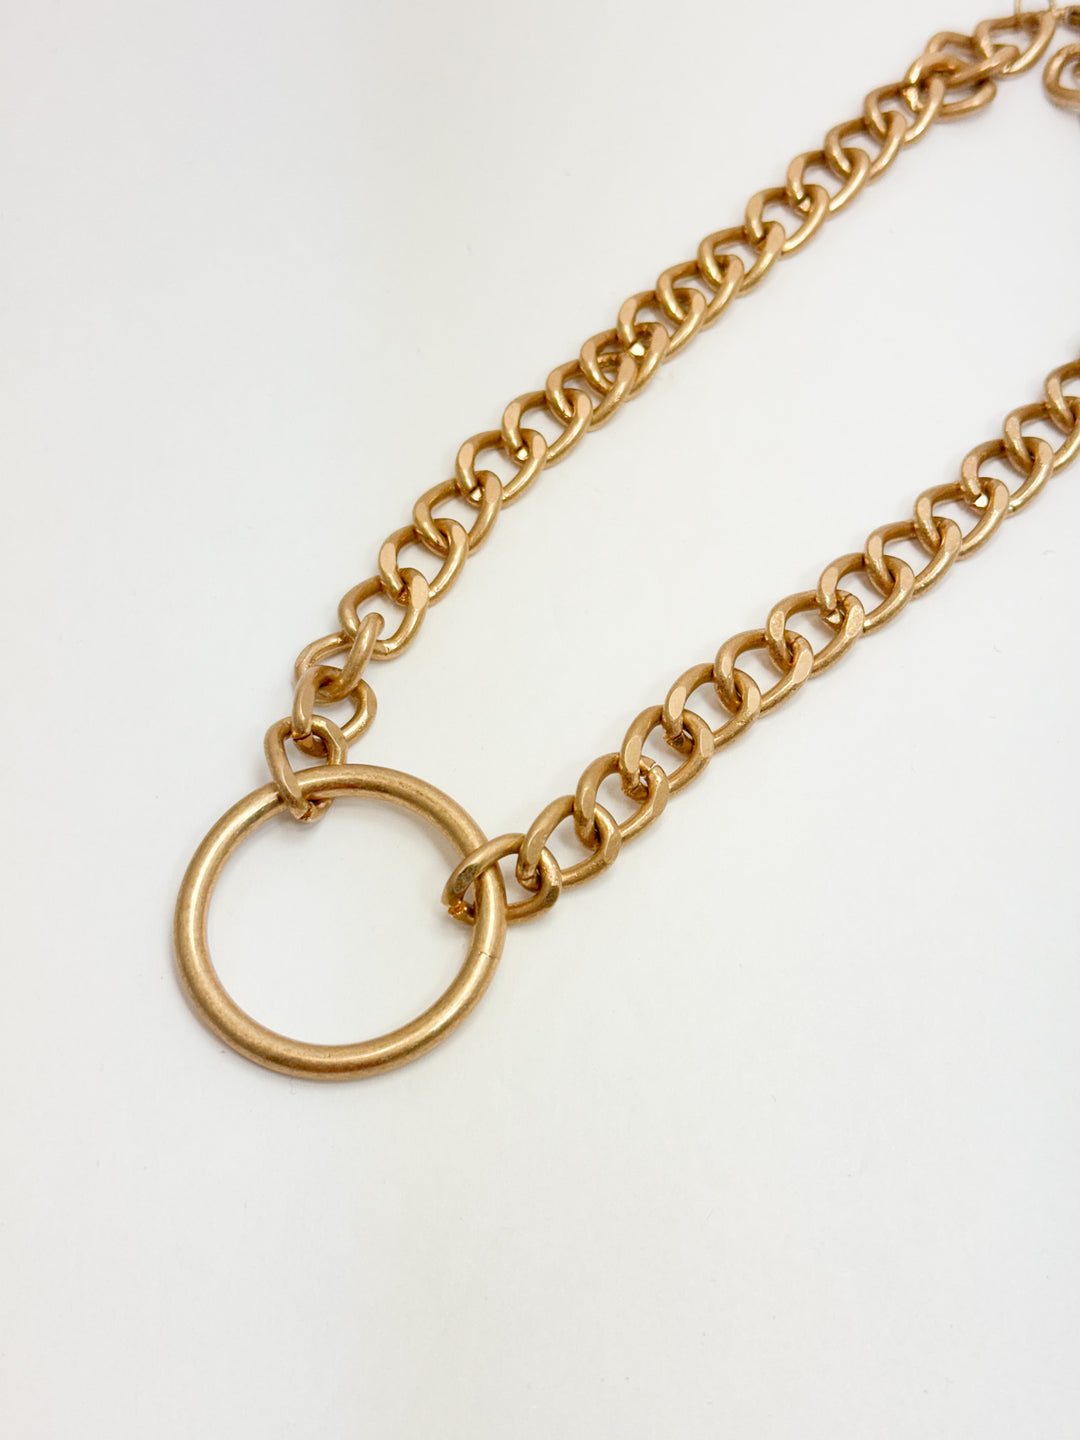 Gold Link Necklace w/ Circle Pendant